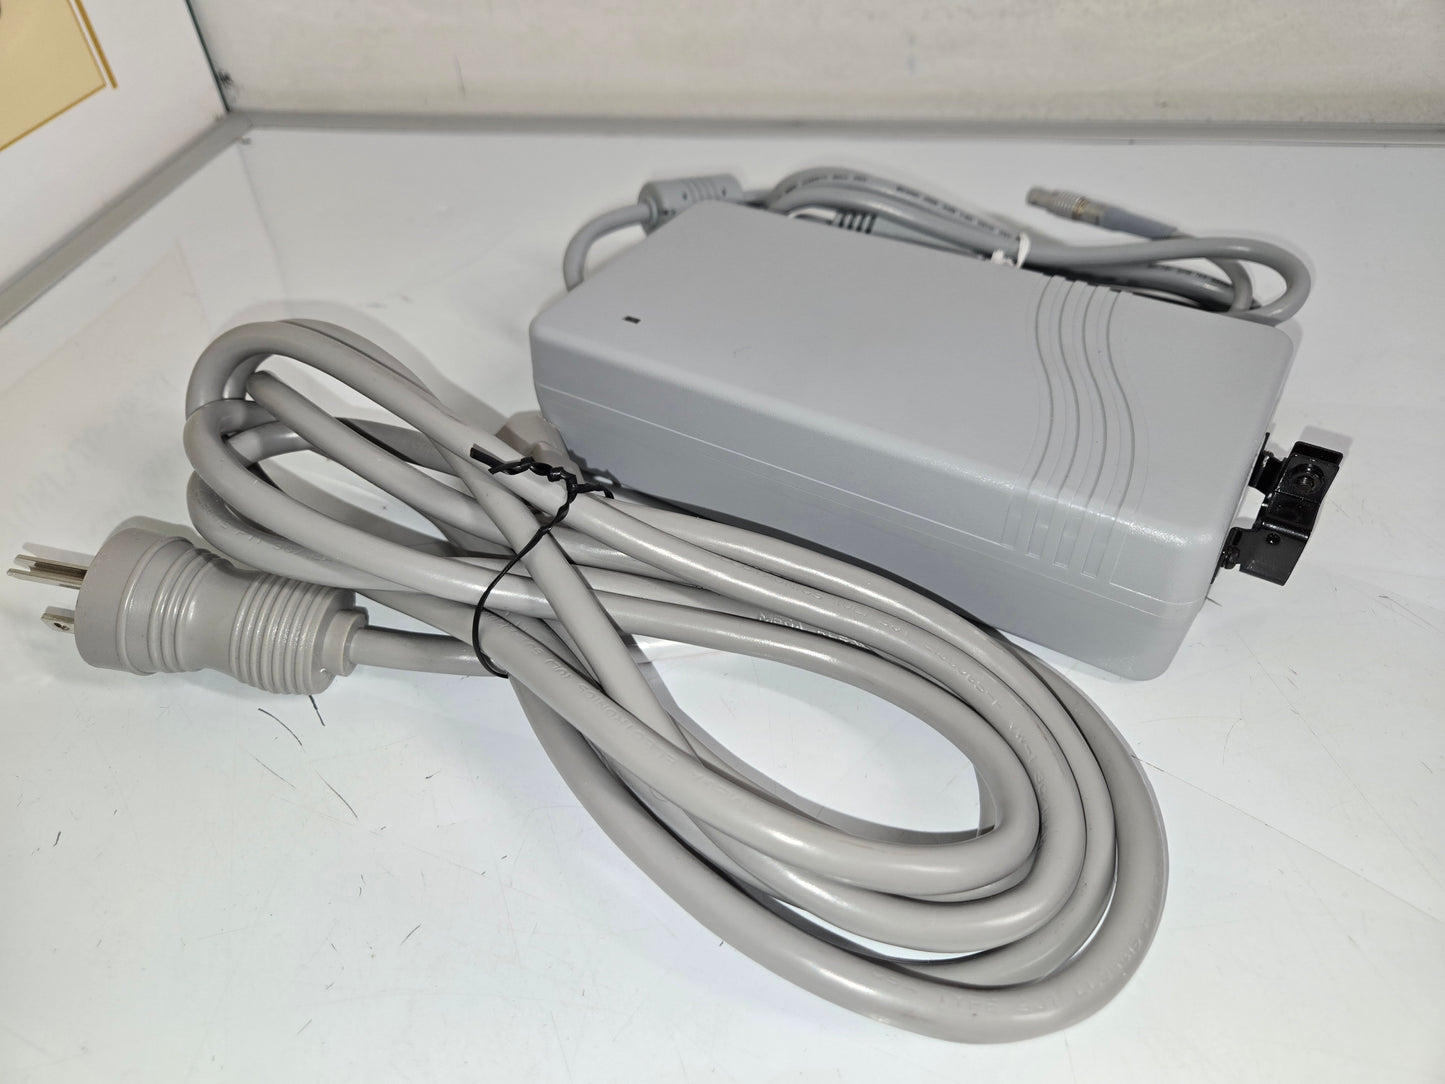 NEW Carefusion/ Vyaire Revel PTV Power Supply with Cord 13881-001